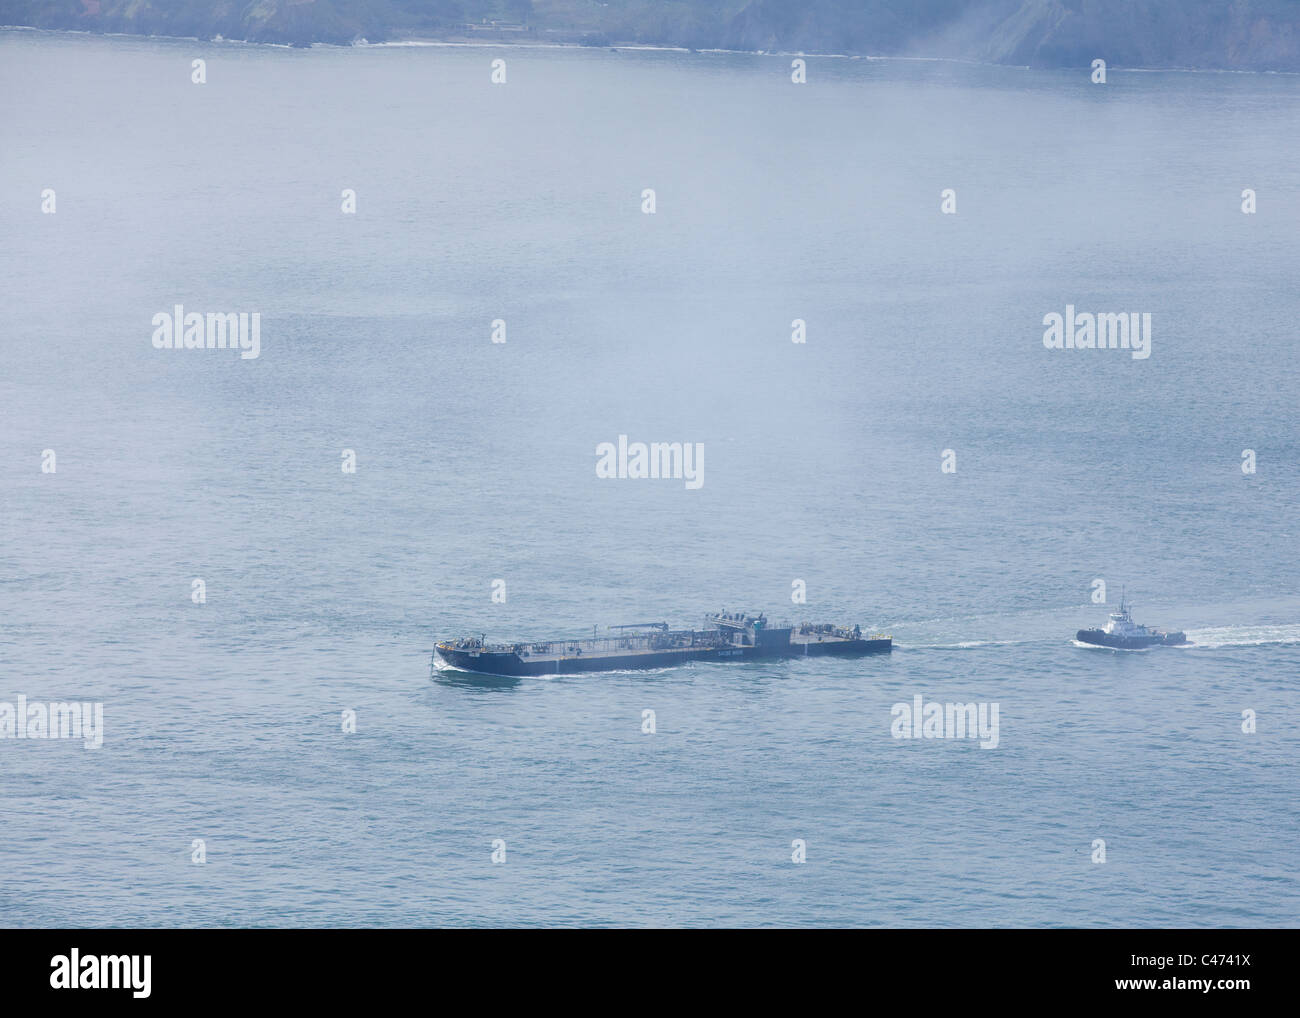 A freight barge makes way into the San Francisco bay under foggy sky Stock Photo